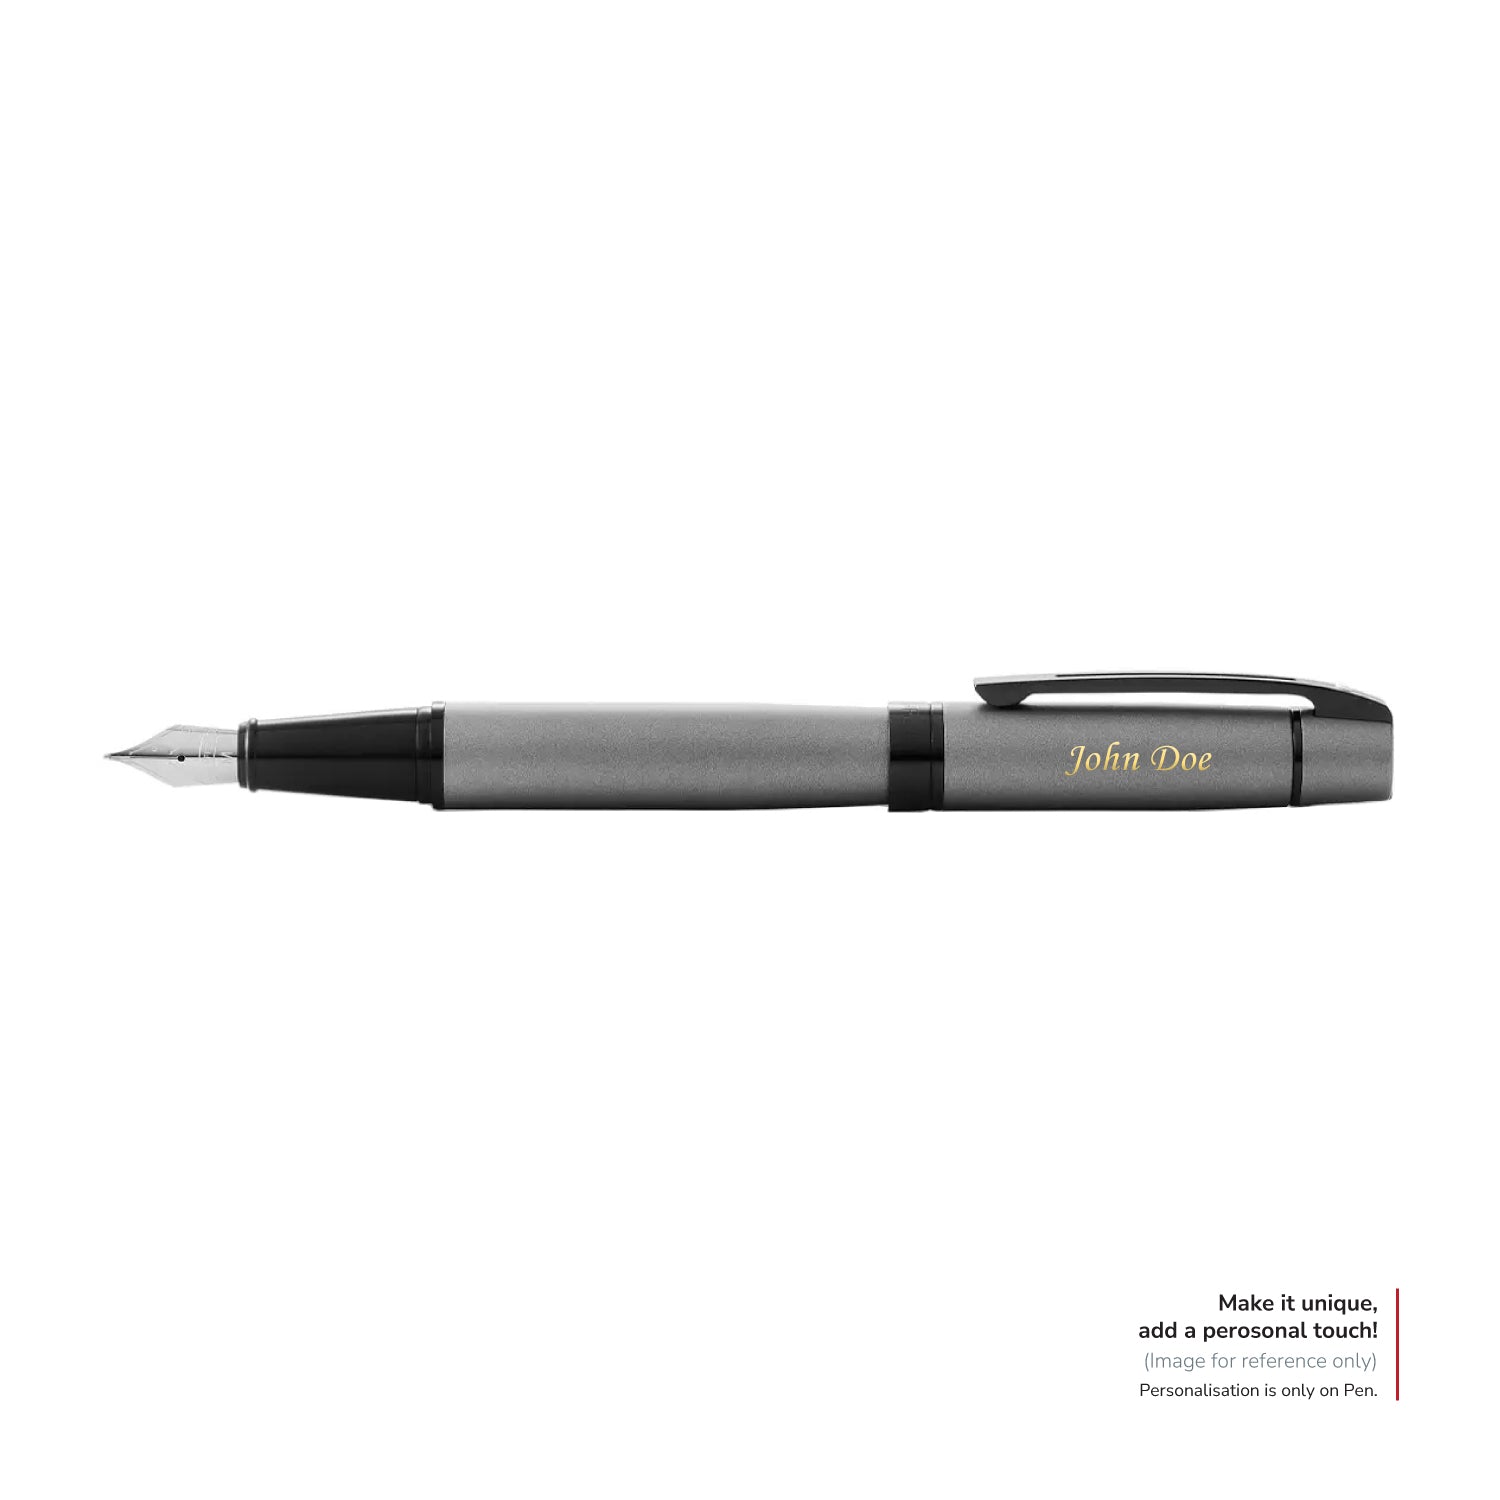 Sheaffer Gift Set ft. Glossy Black 300 Ballpoint Pen with Chrome Trims and Business Card Holder